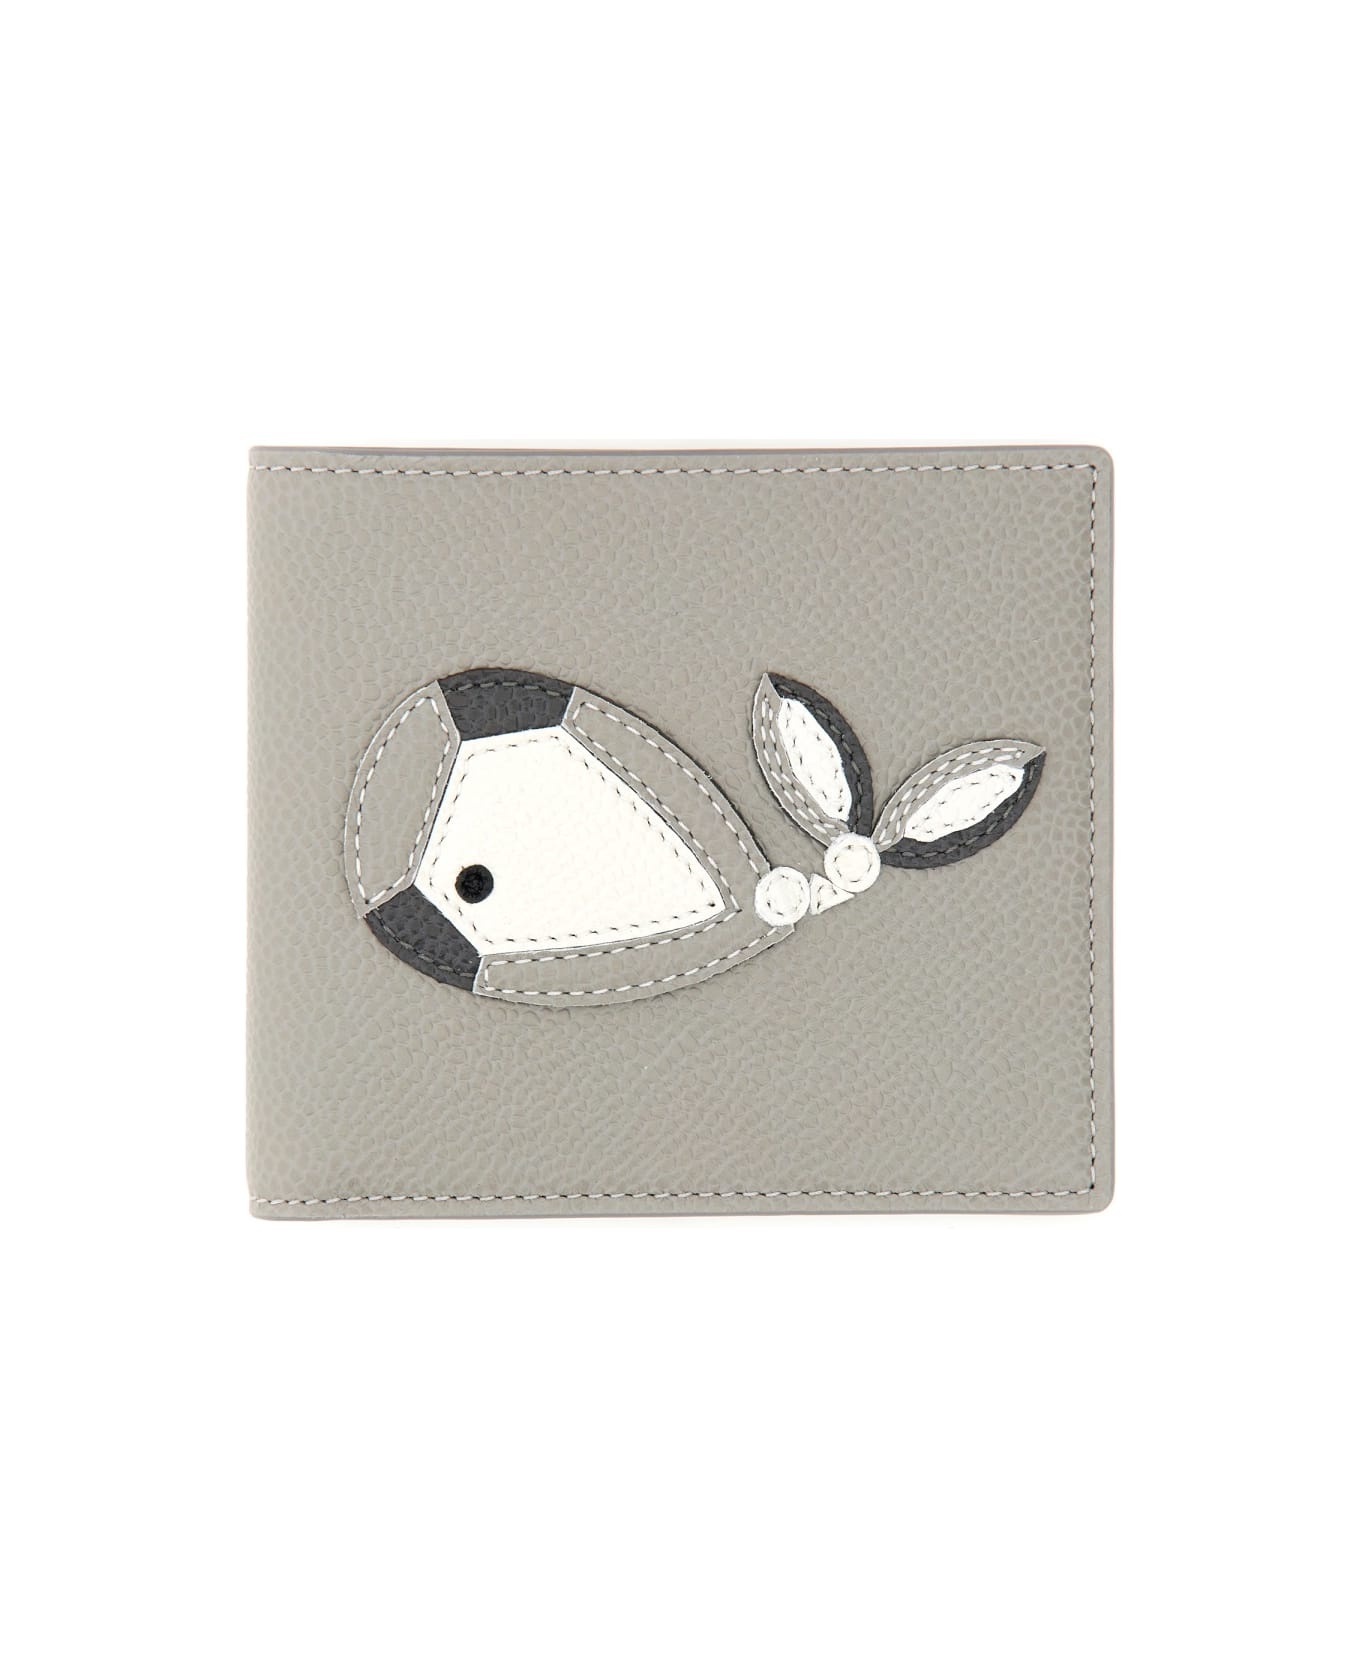 Wallet With Whale Application - 1